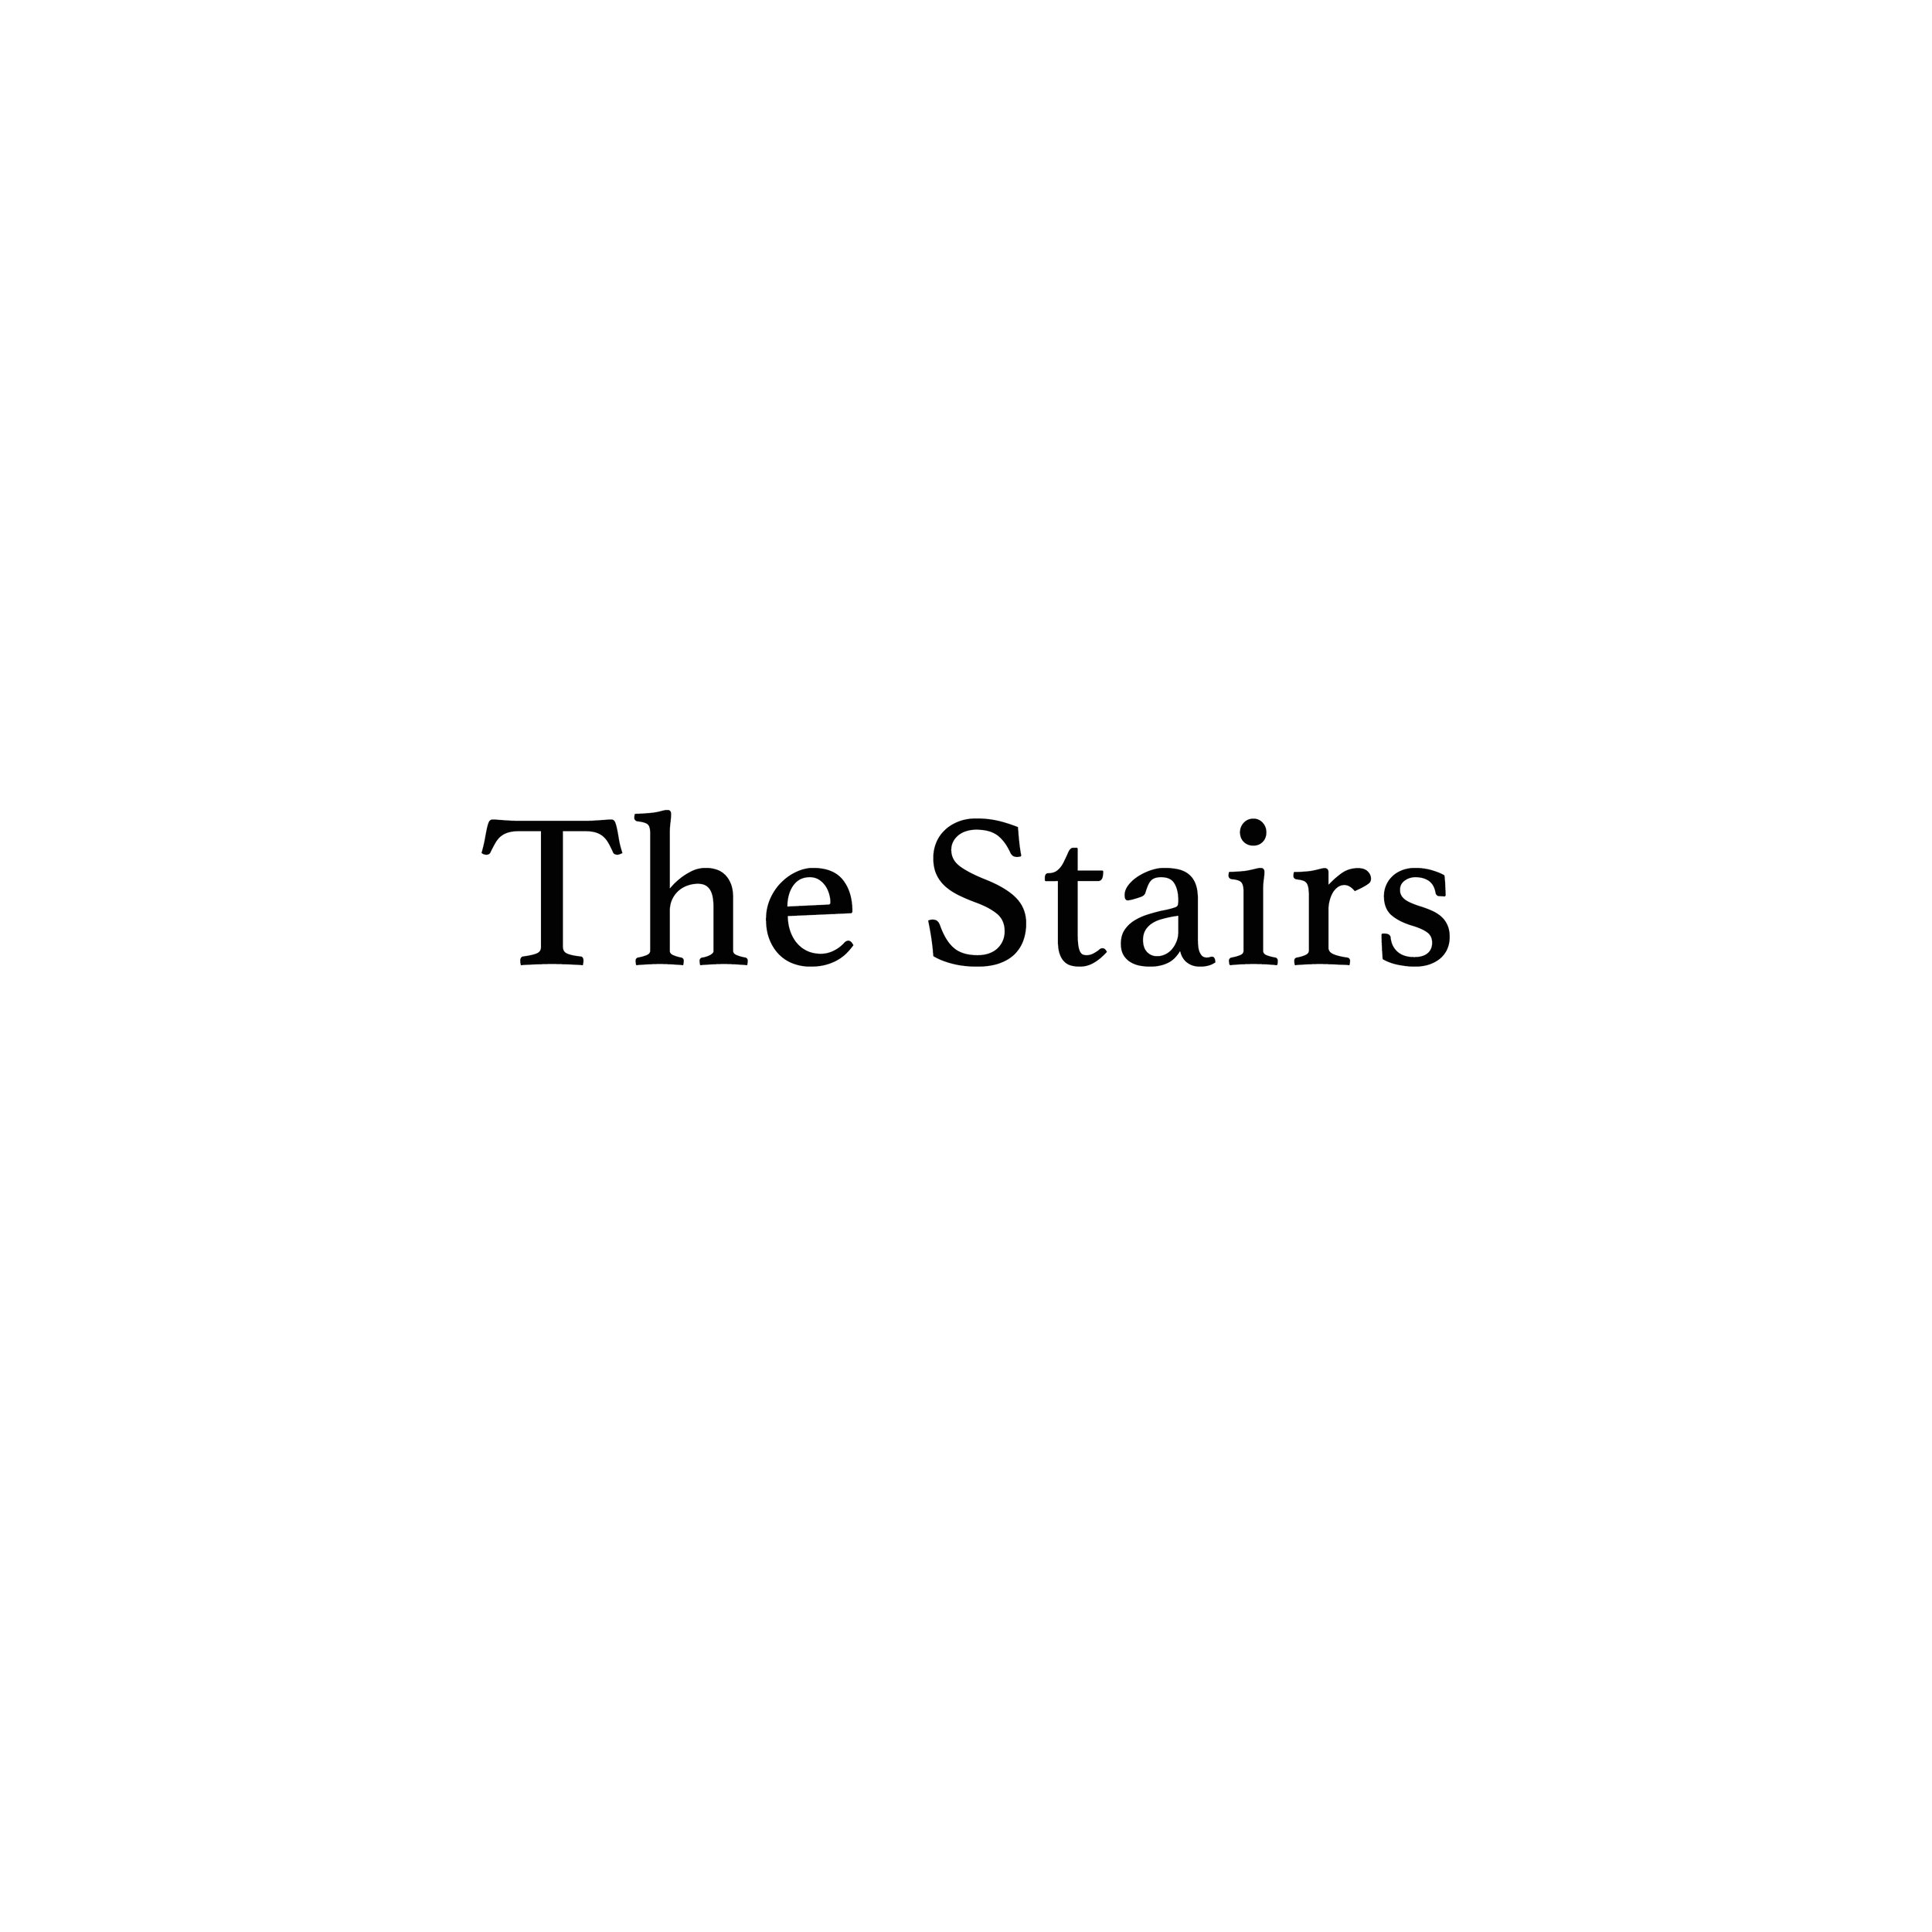 The stairs.jpg